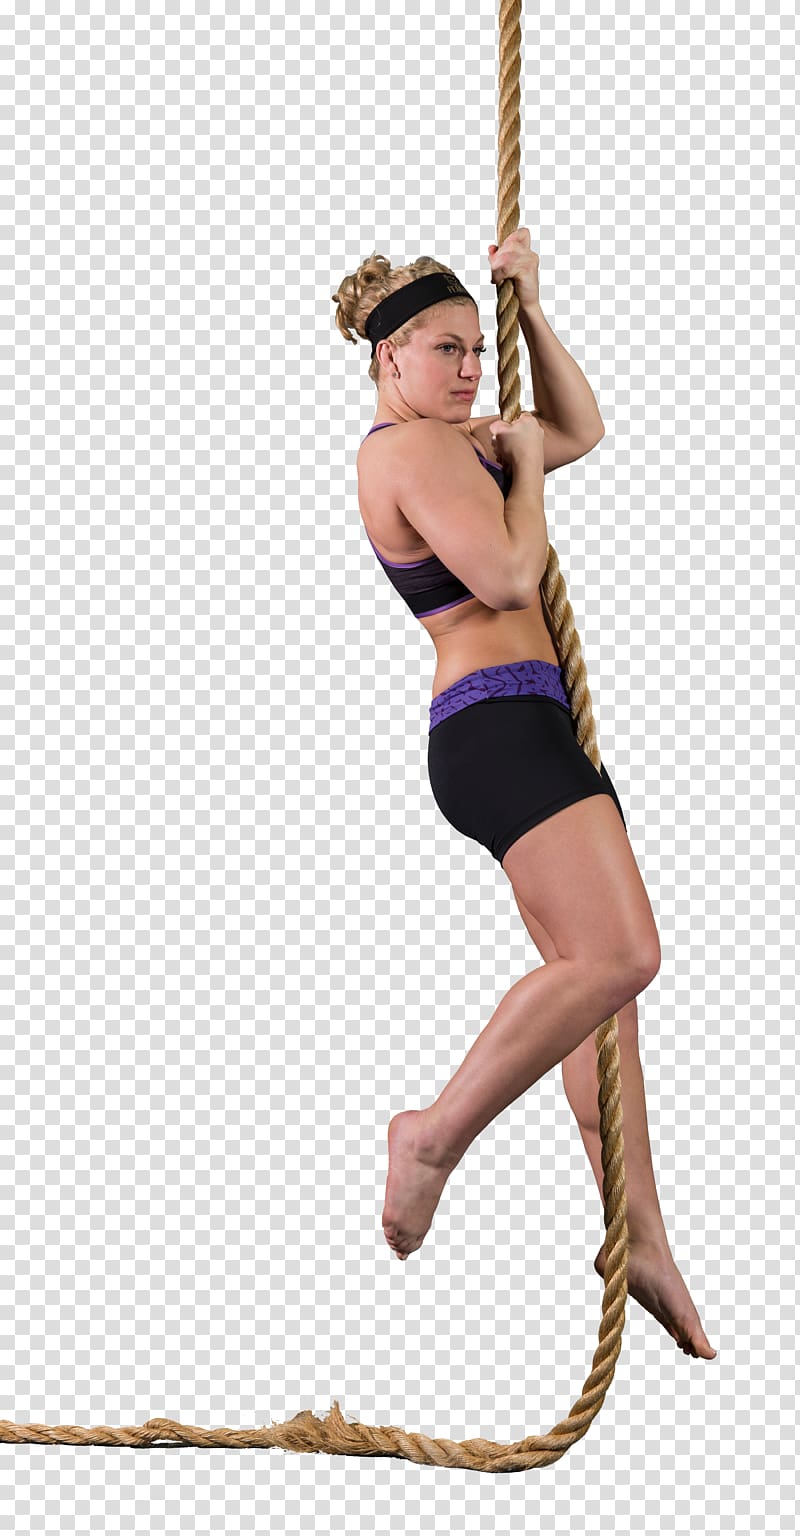 Judo Athlete Sport Mixed martial arts Female, others transparent background PNG clipart